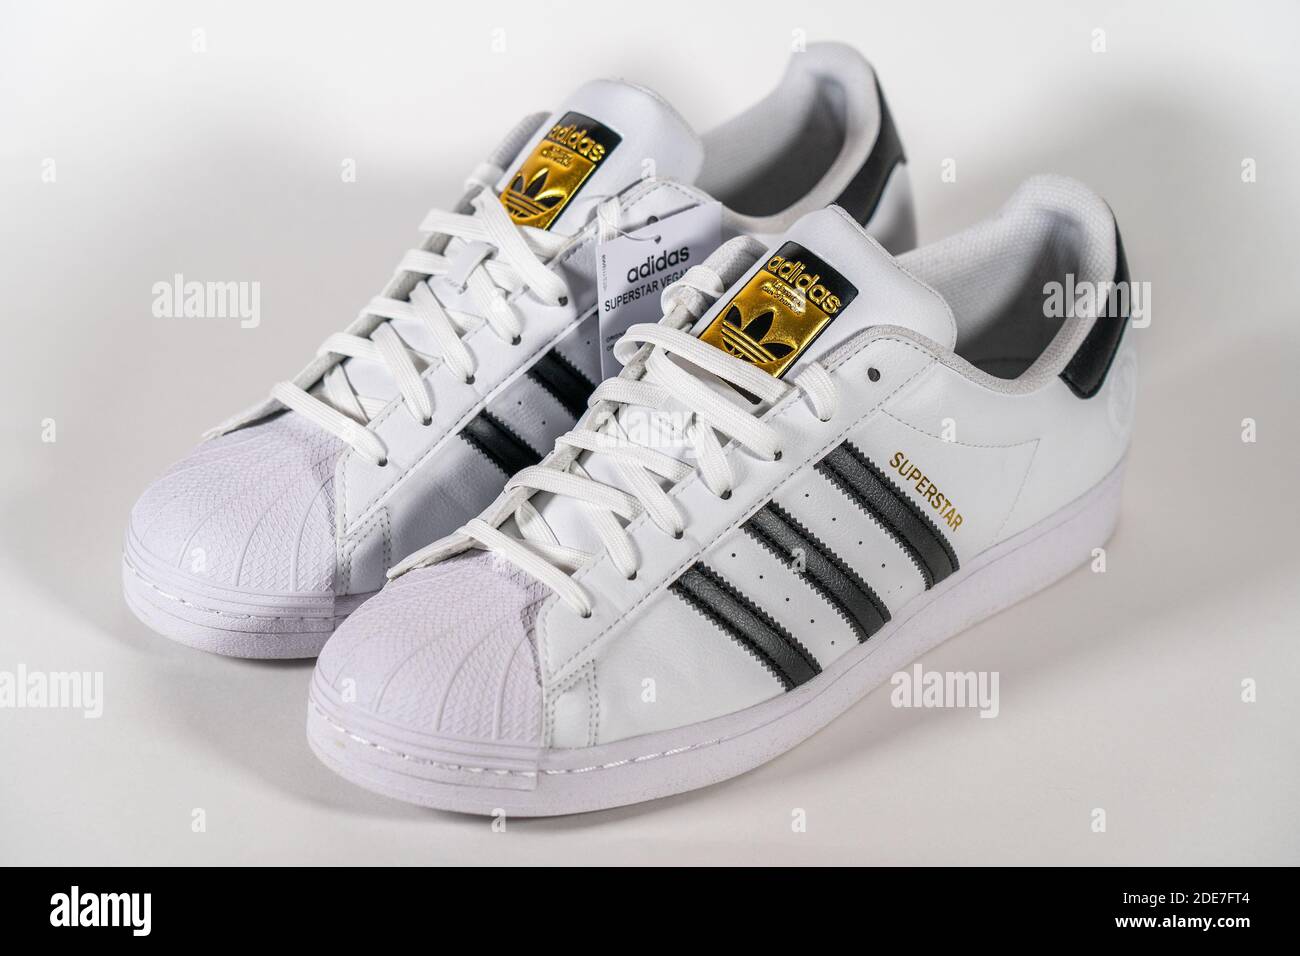 Adidas Superstar - famous sneaker model produced by German manufacturer of sports equipment and accessories Adidas. Retro basketball in production since 1969 - Moscow, Russia November 2020 Stock - Alamy